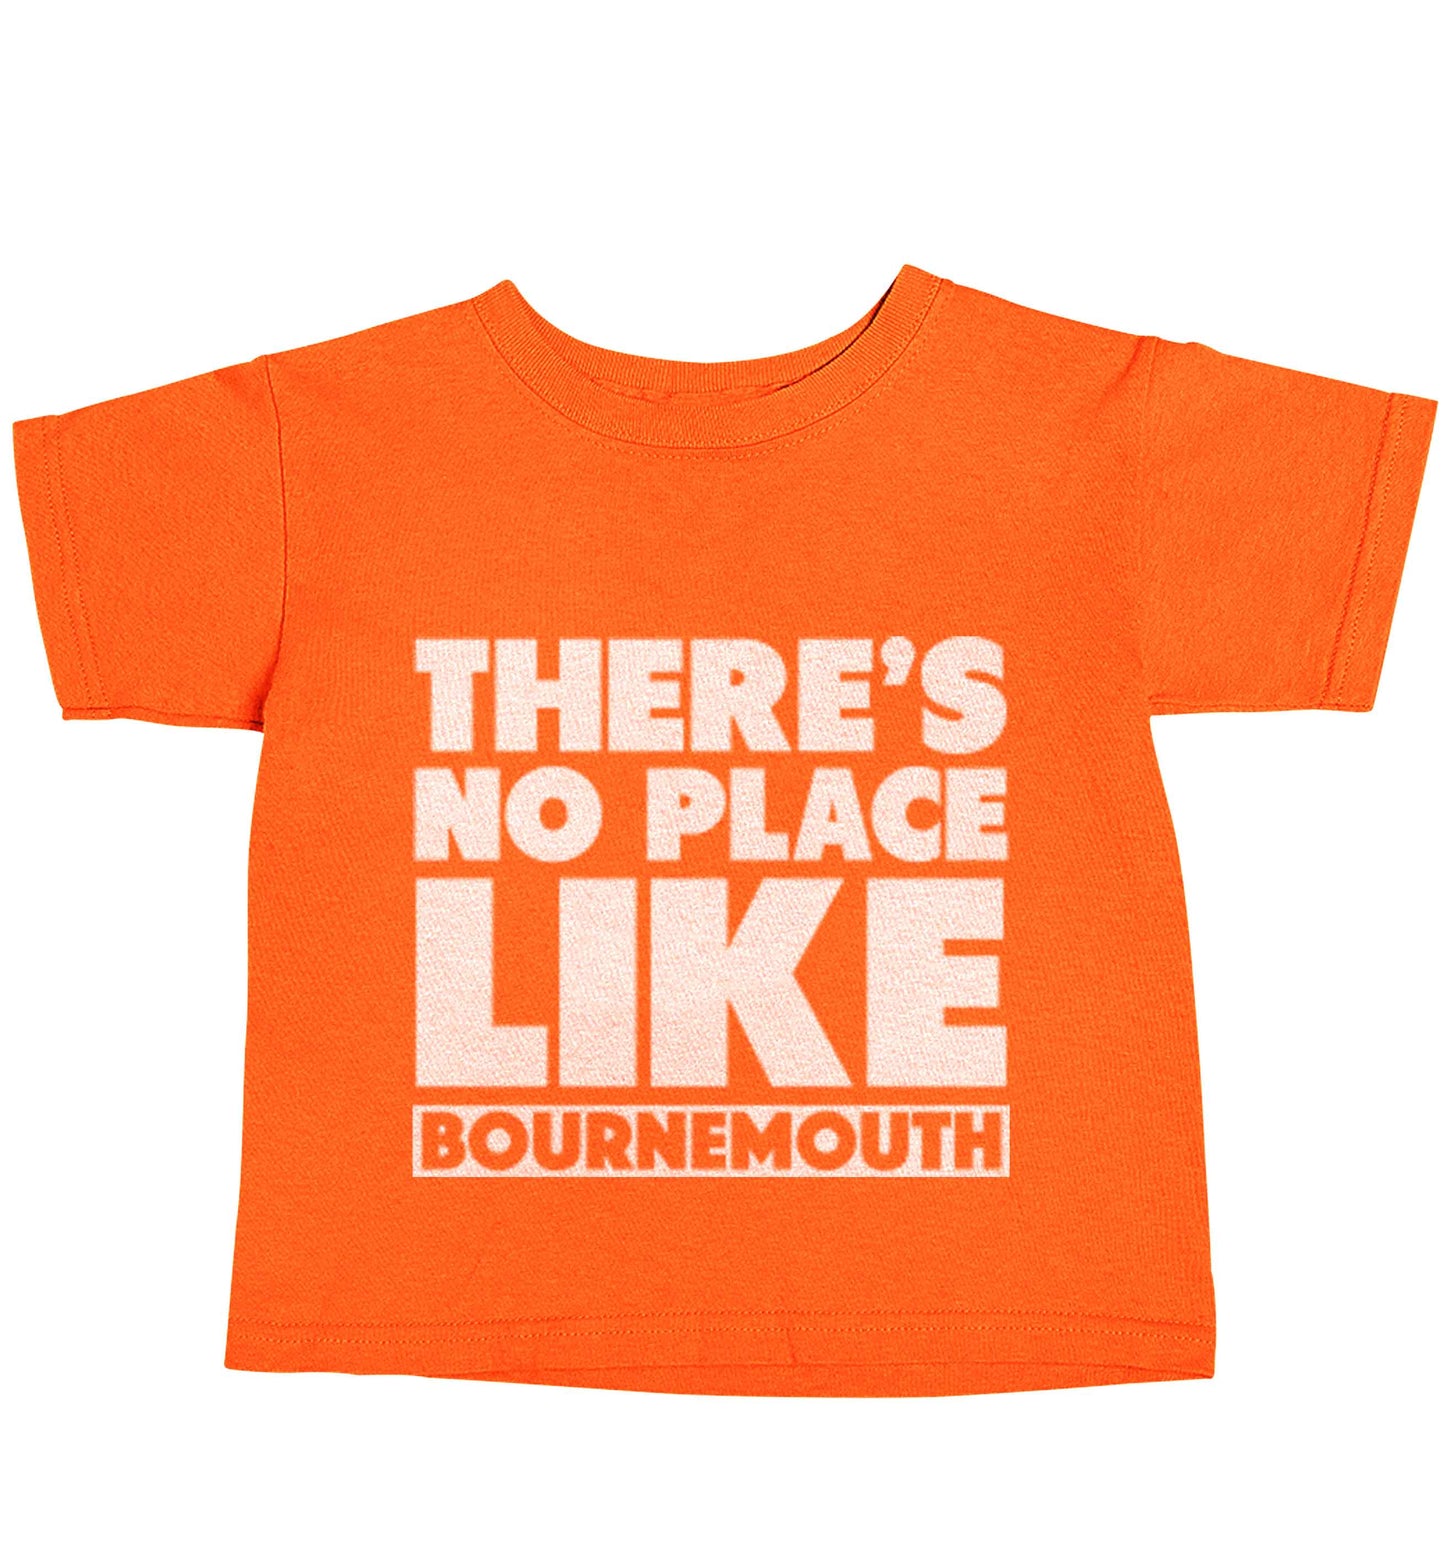 There's no place like Bournemouth orange baby toddler Tshirt 2 Years